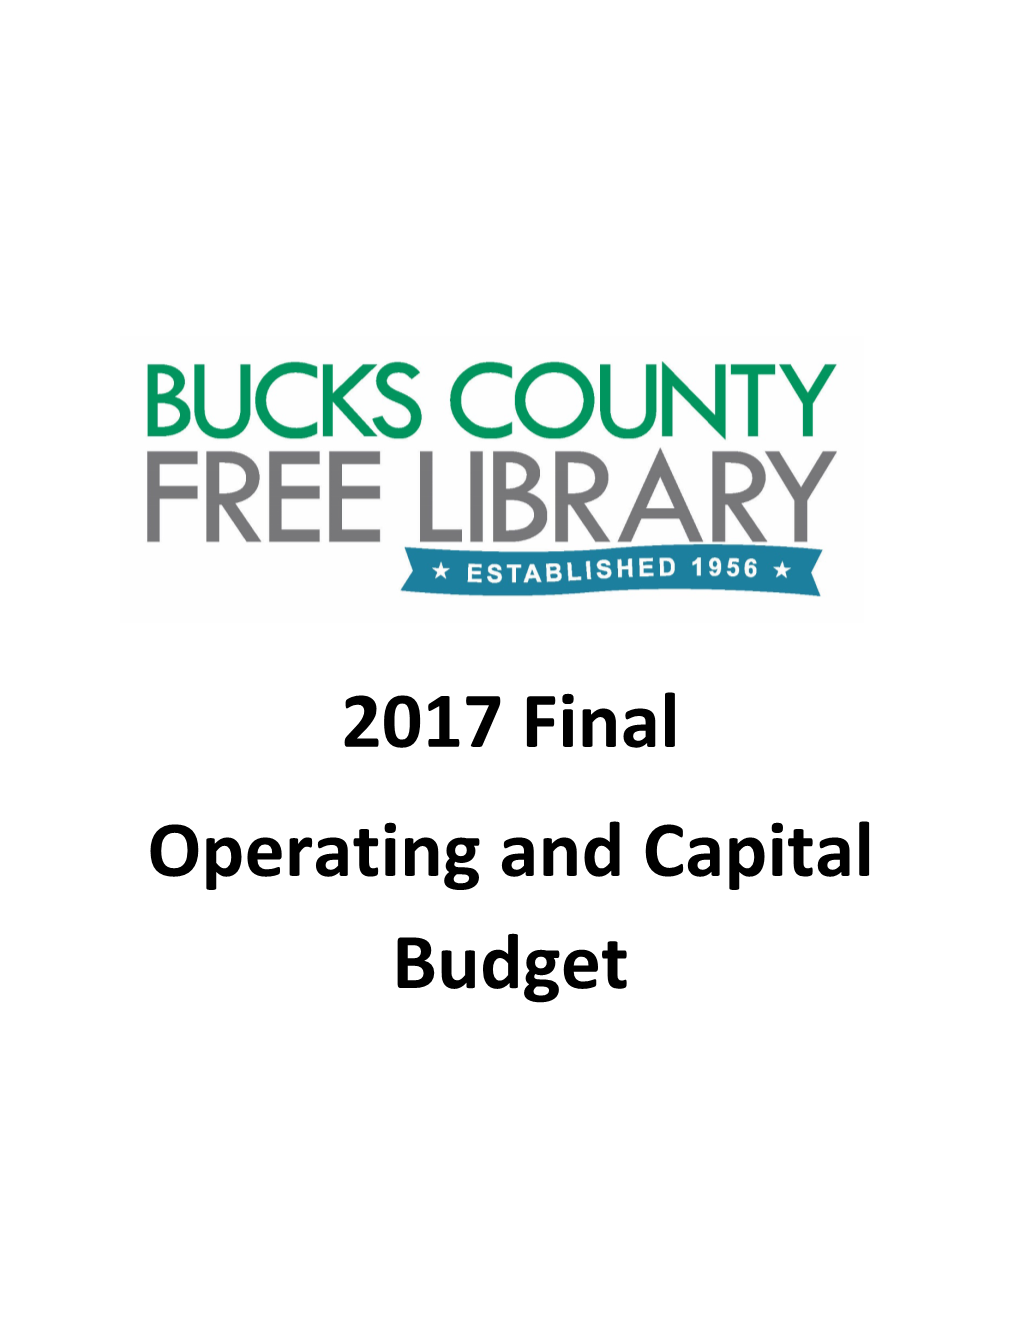 2017 Final Operating and Capital Budget